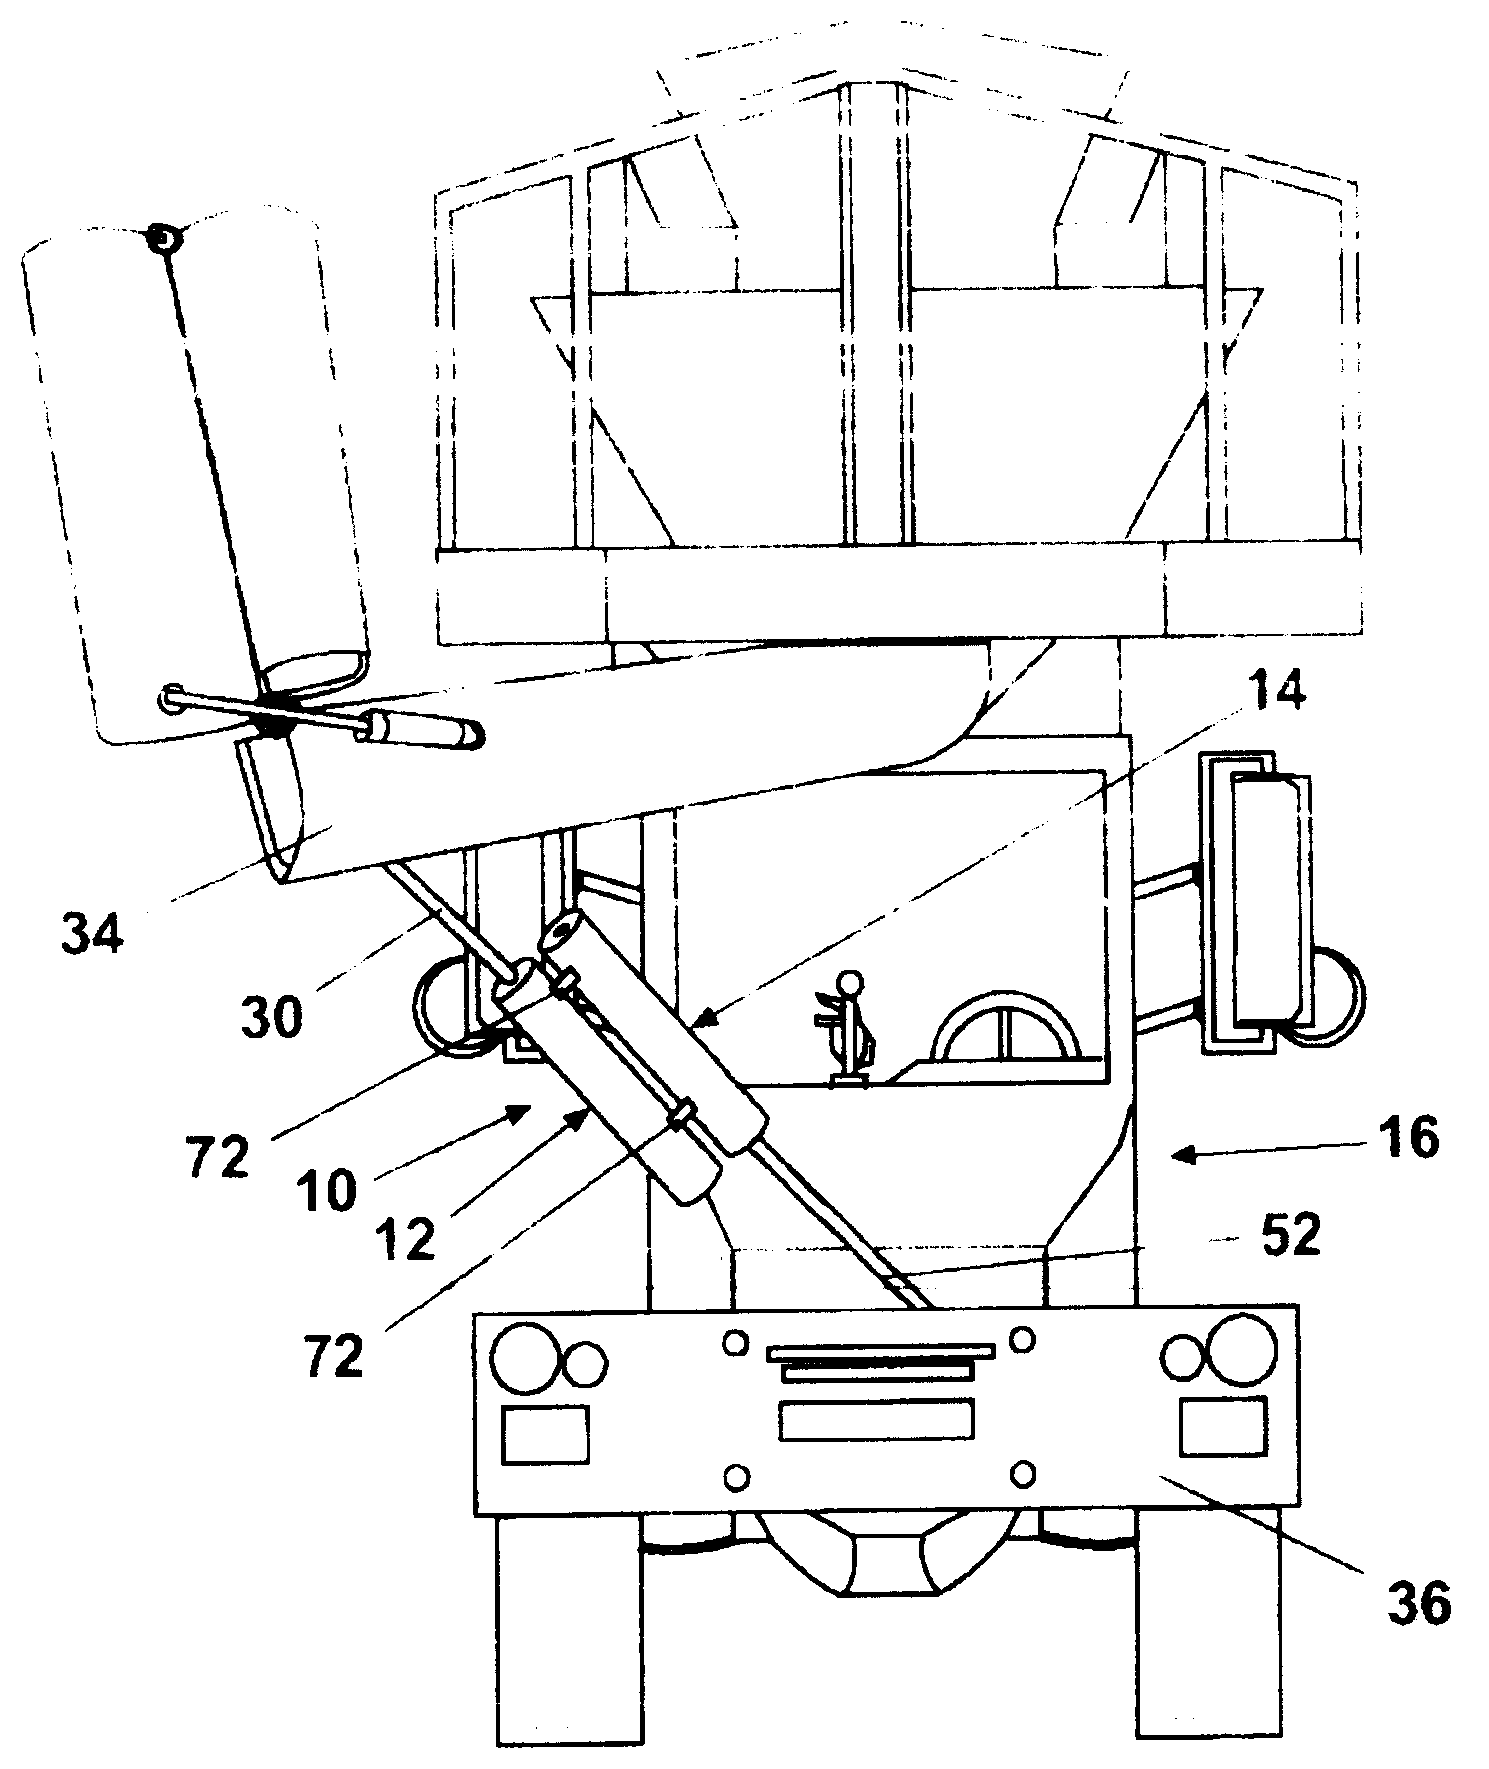 Hydraulic actuator assembly with rotation restraint